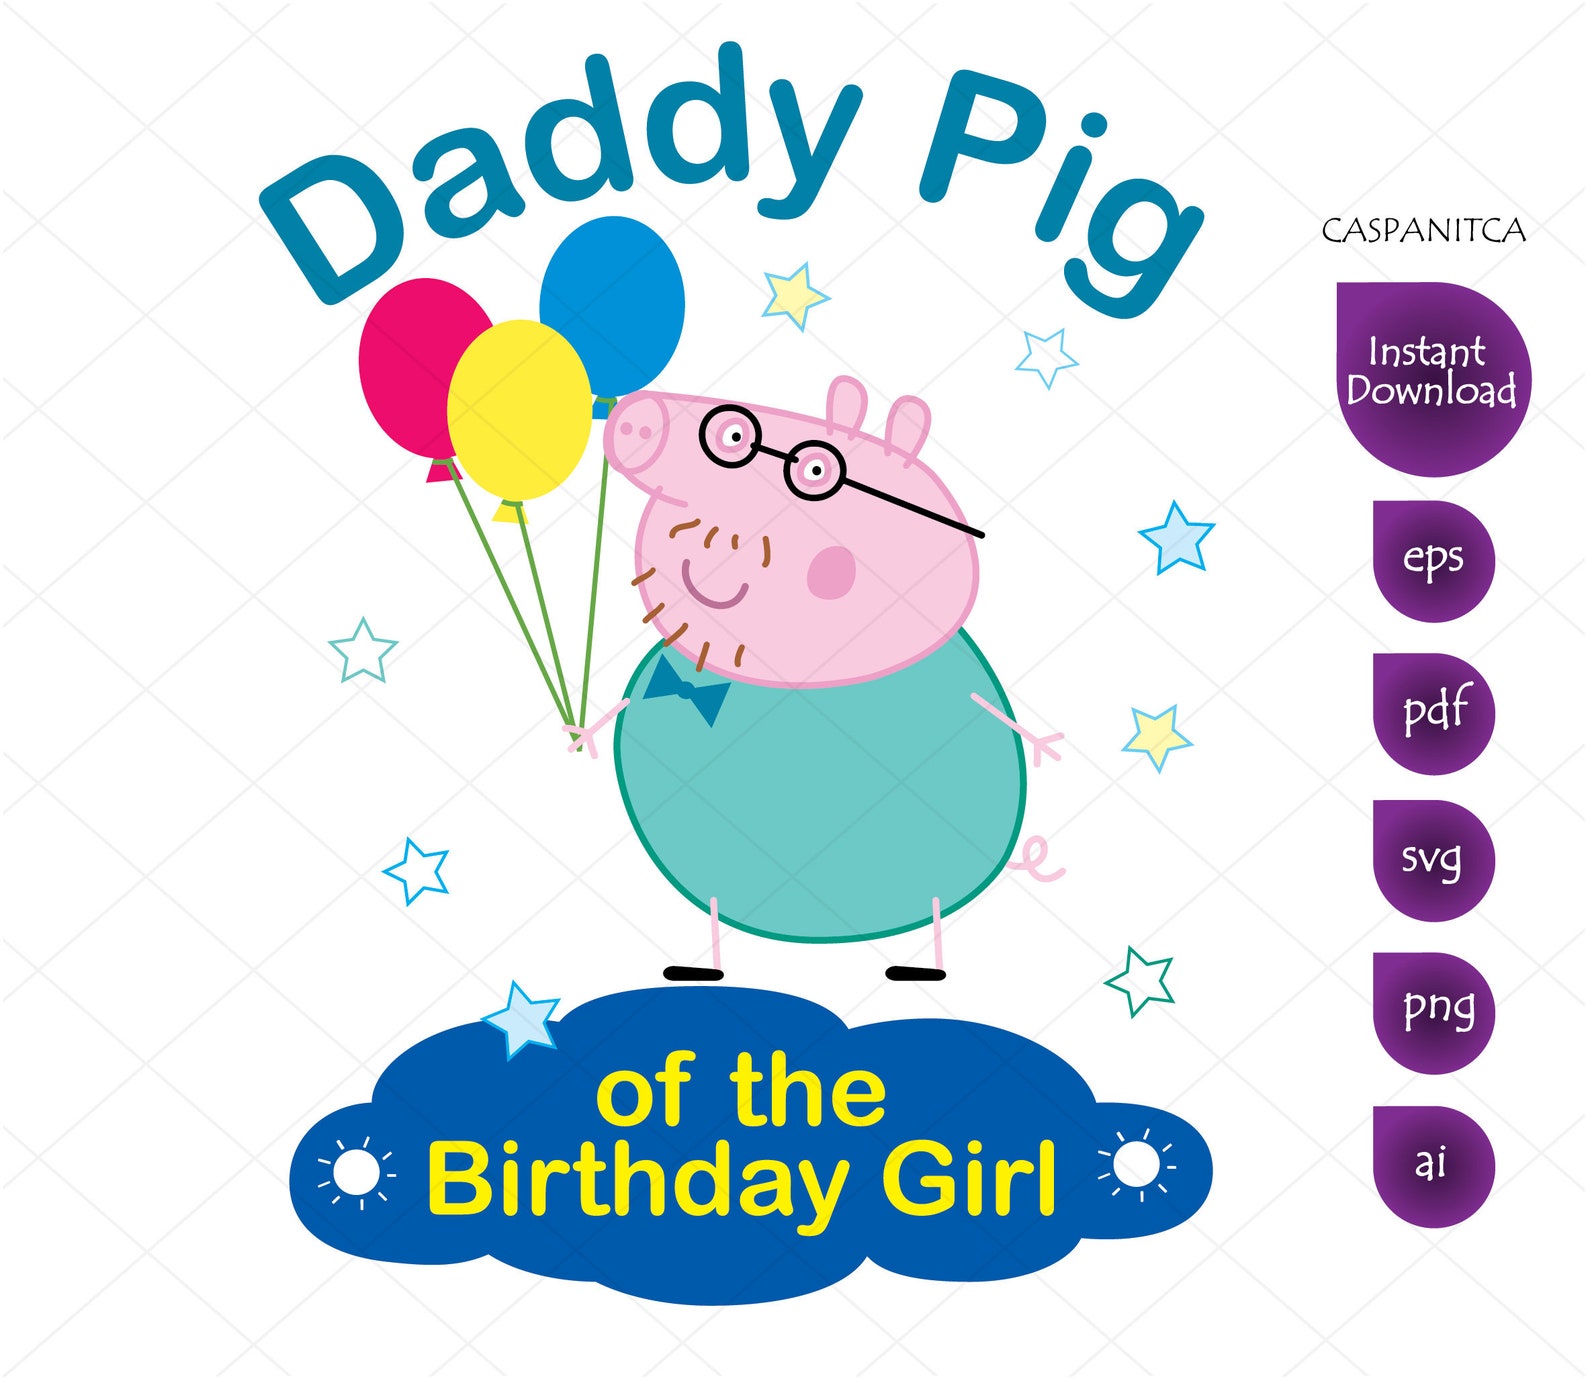 Download Daddy Pig of the Birthday Girl Clipart Peppa Pig svg | Etsy